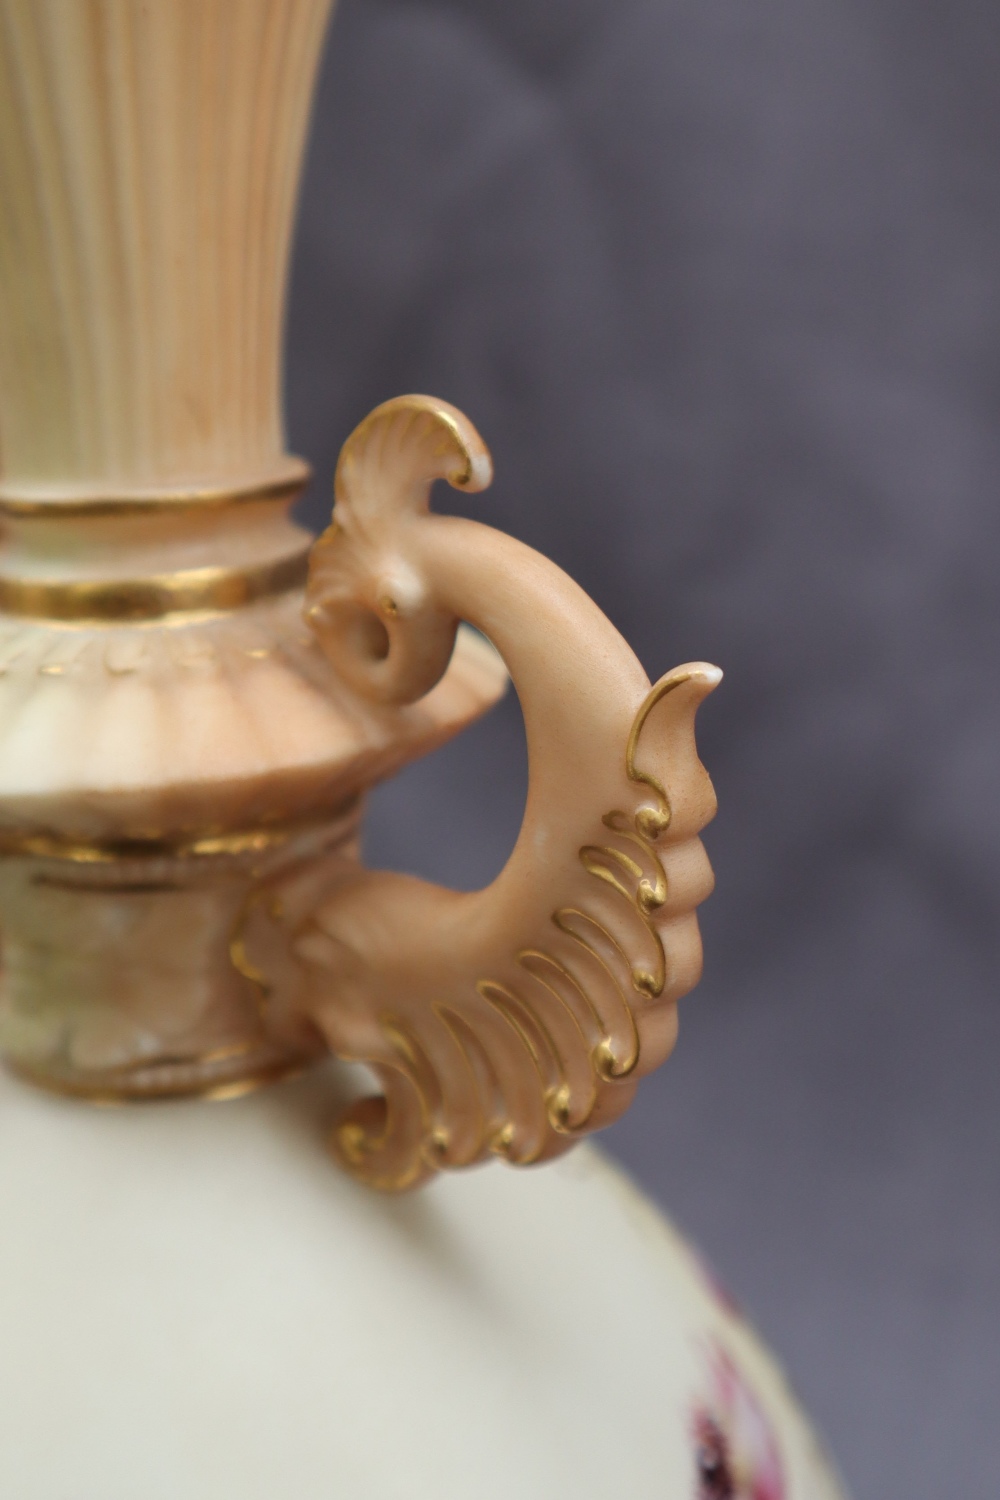 A Royal Worcester porcelain twin handled vase with a flared neck and scrolling handles, - Image 5 of 7